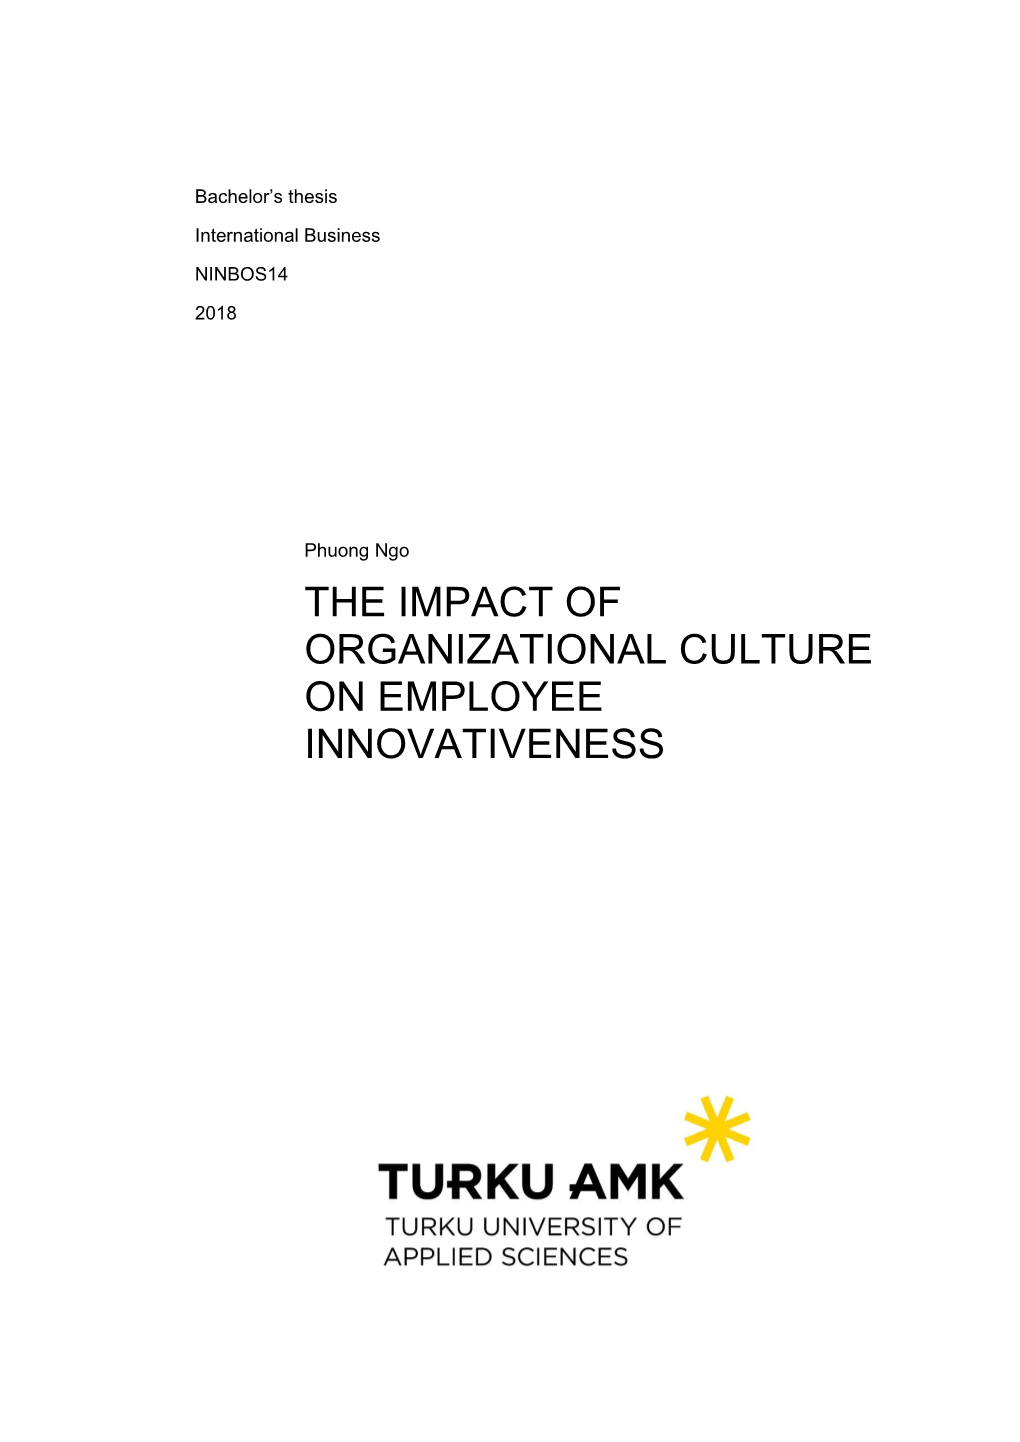 The Impact of Organizational Culture on Employee Innovativeness